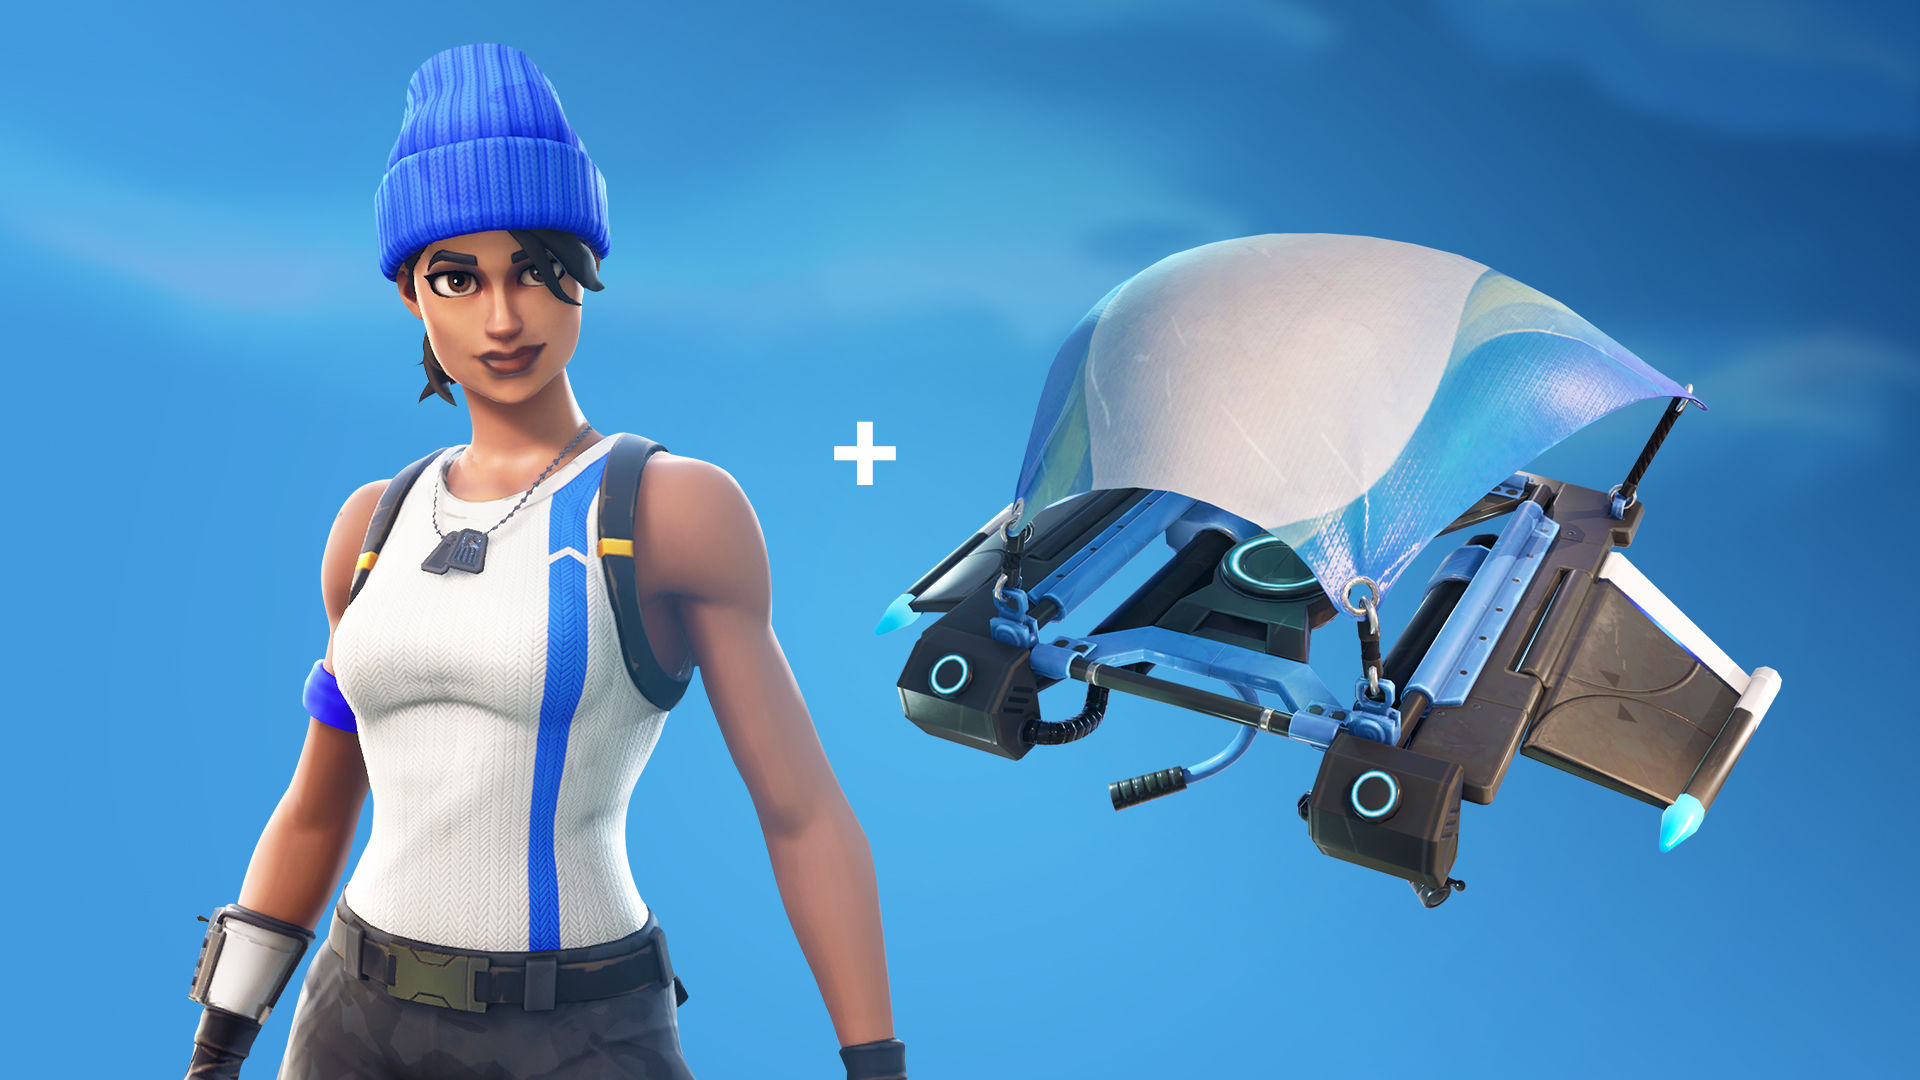 free ps plus costumes impulse grenades and more have arrived in fortnite battle royale with today s big update now live - fortnite free update